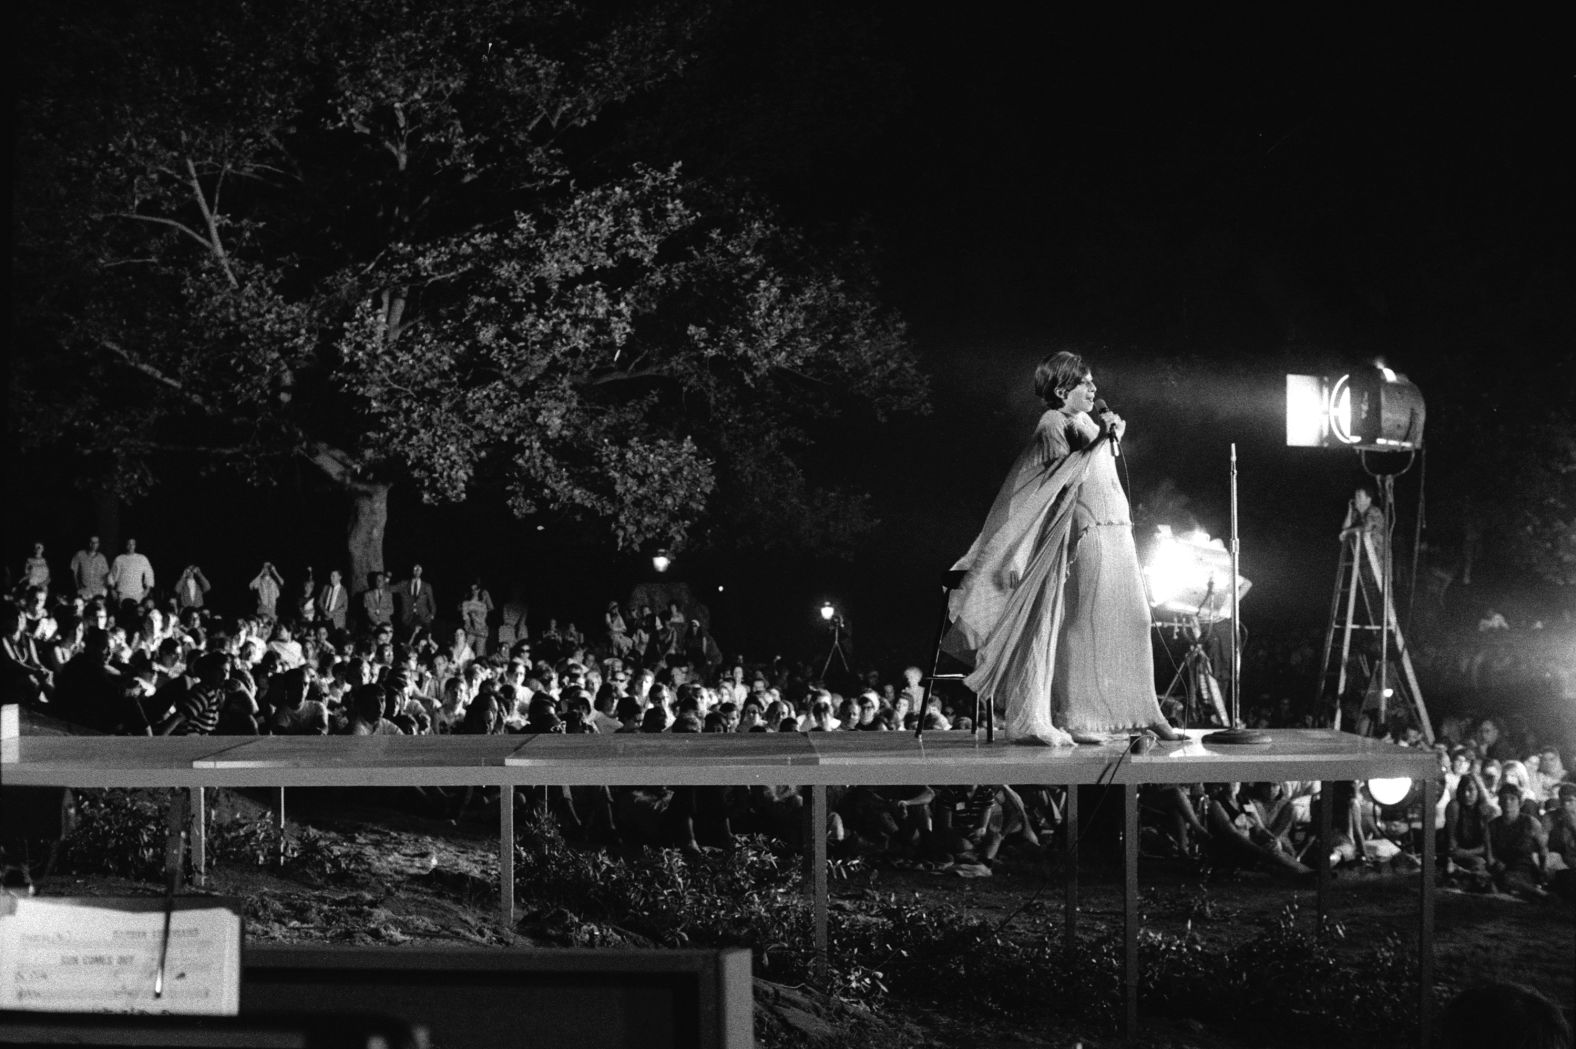 Streisand performs at a concert in New York's Central Park in 1967.